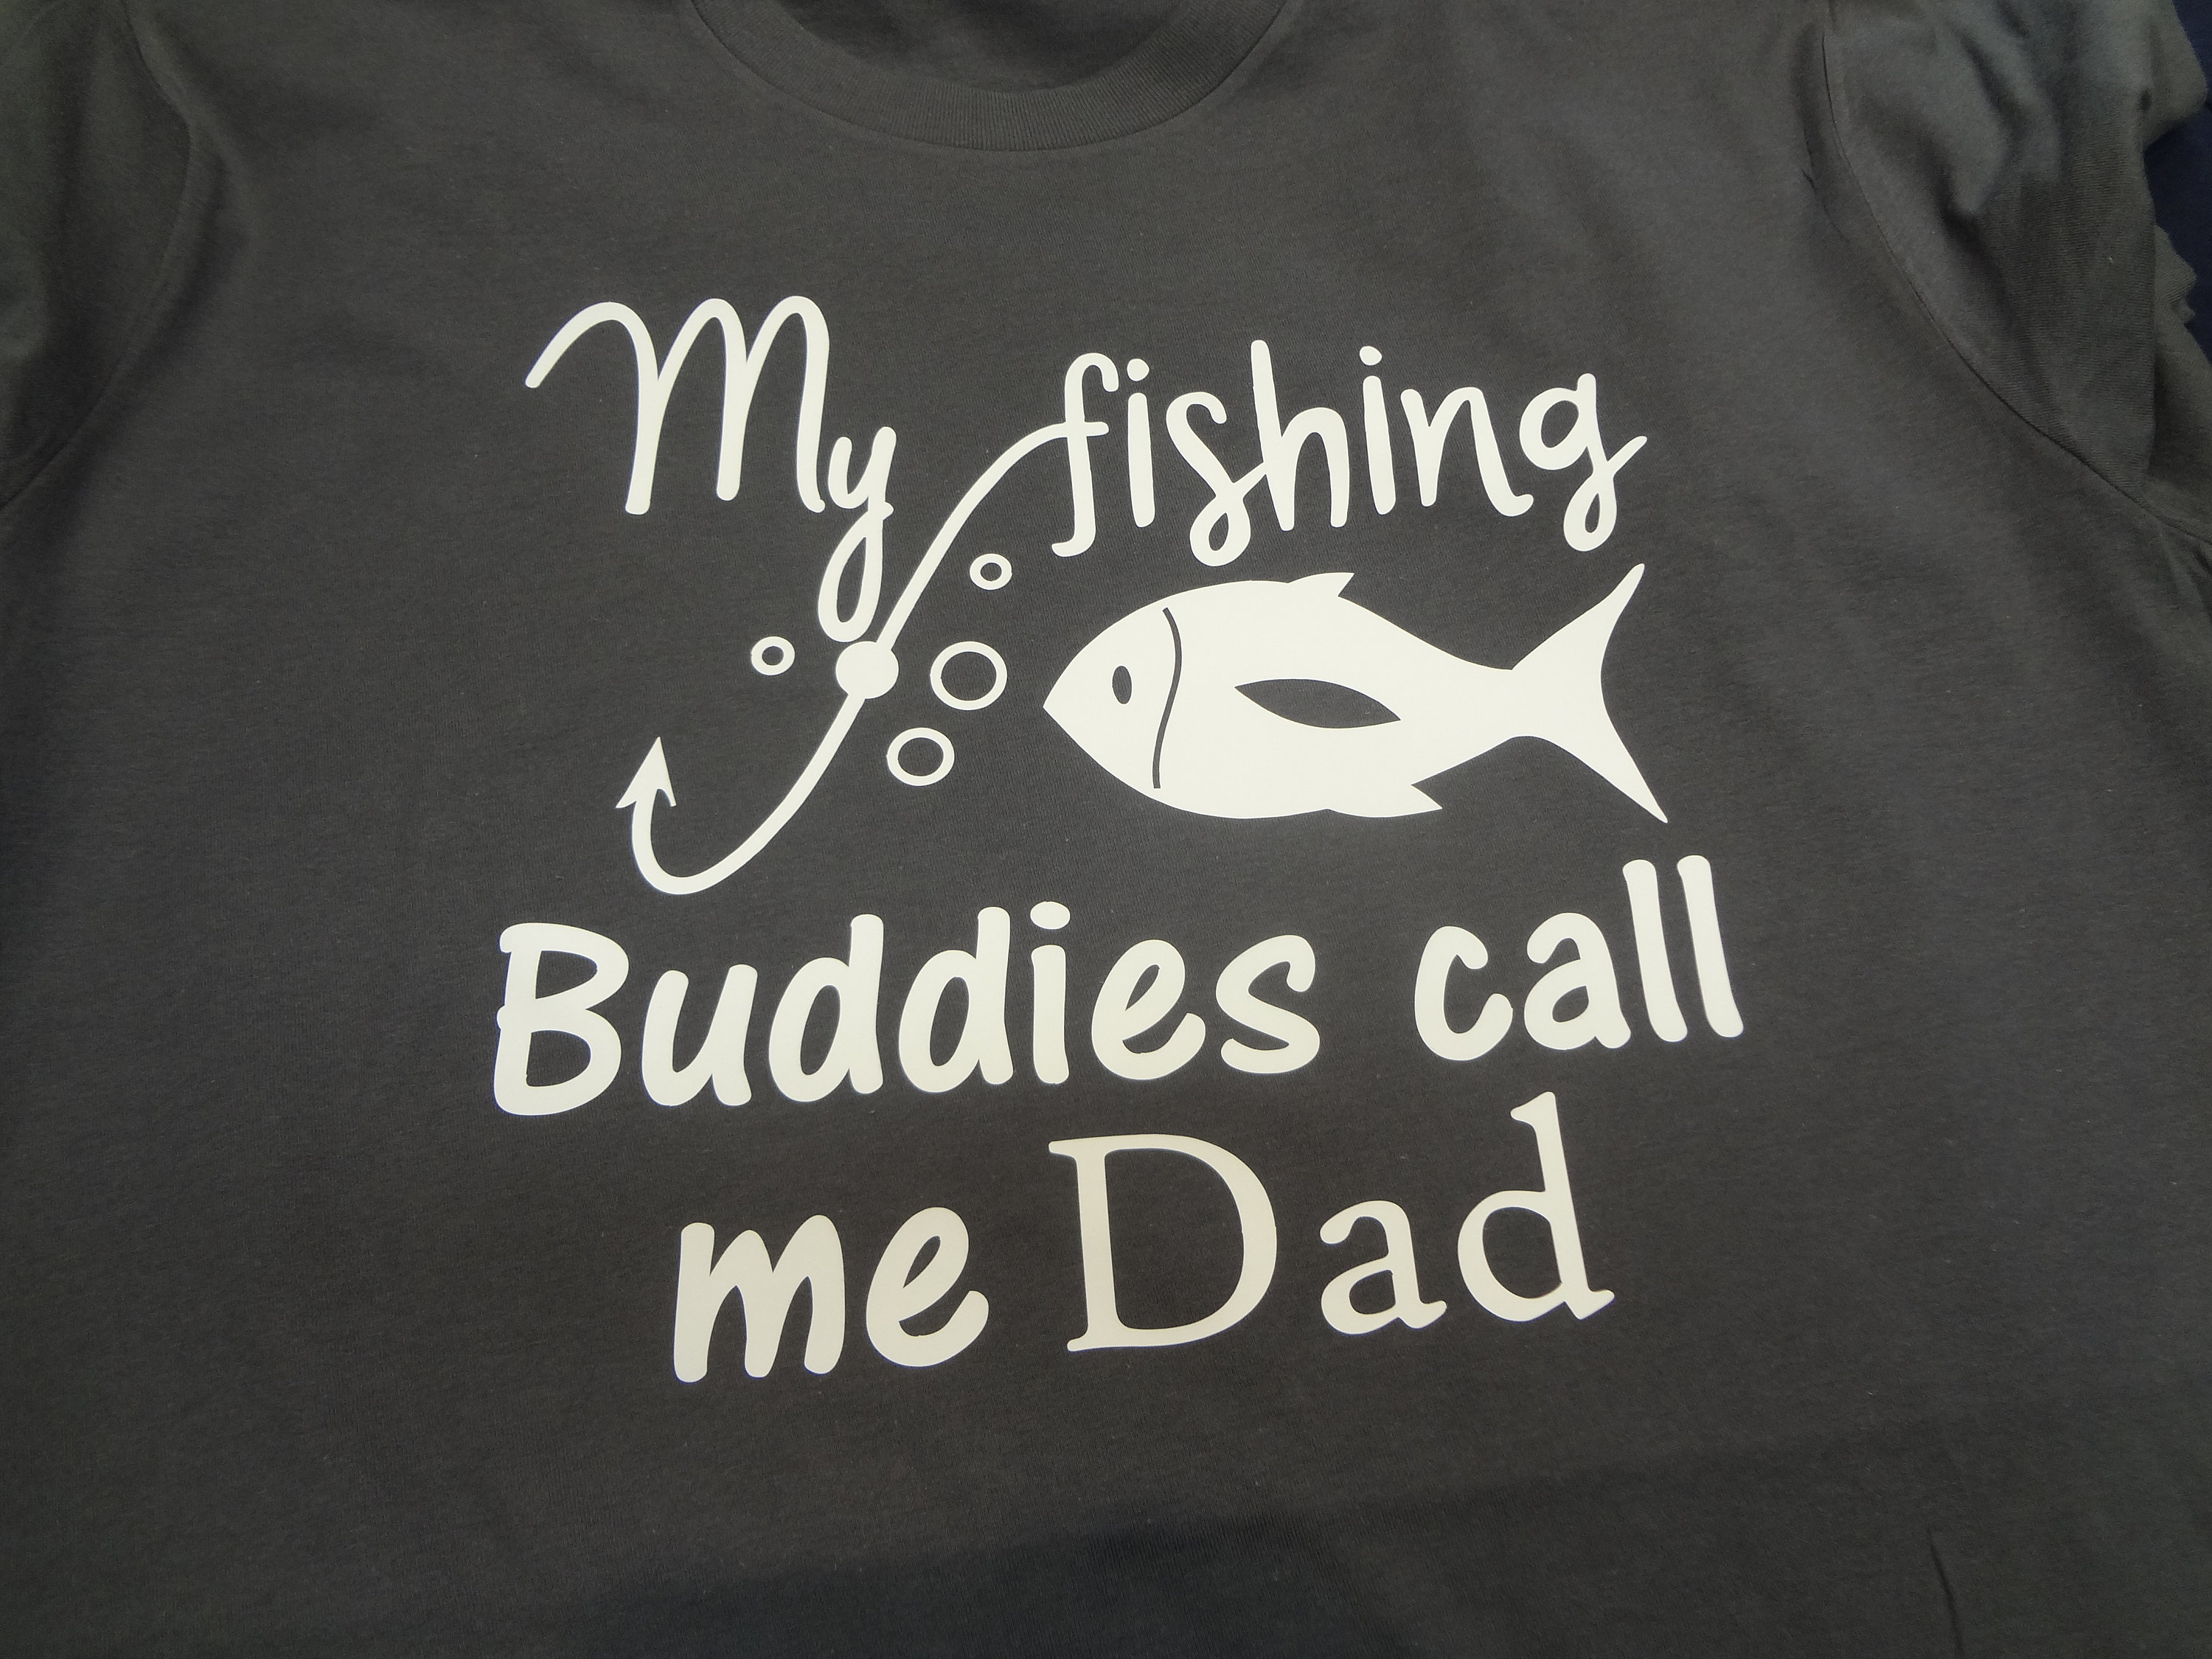 I Love Going Fishing With My Uncle Men's Premium T-Shirt